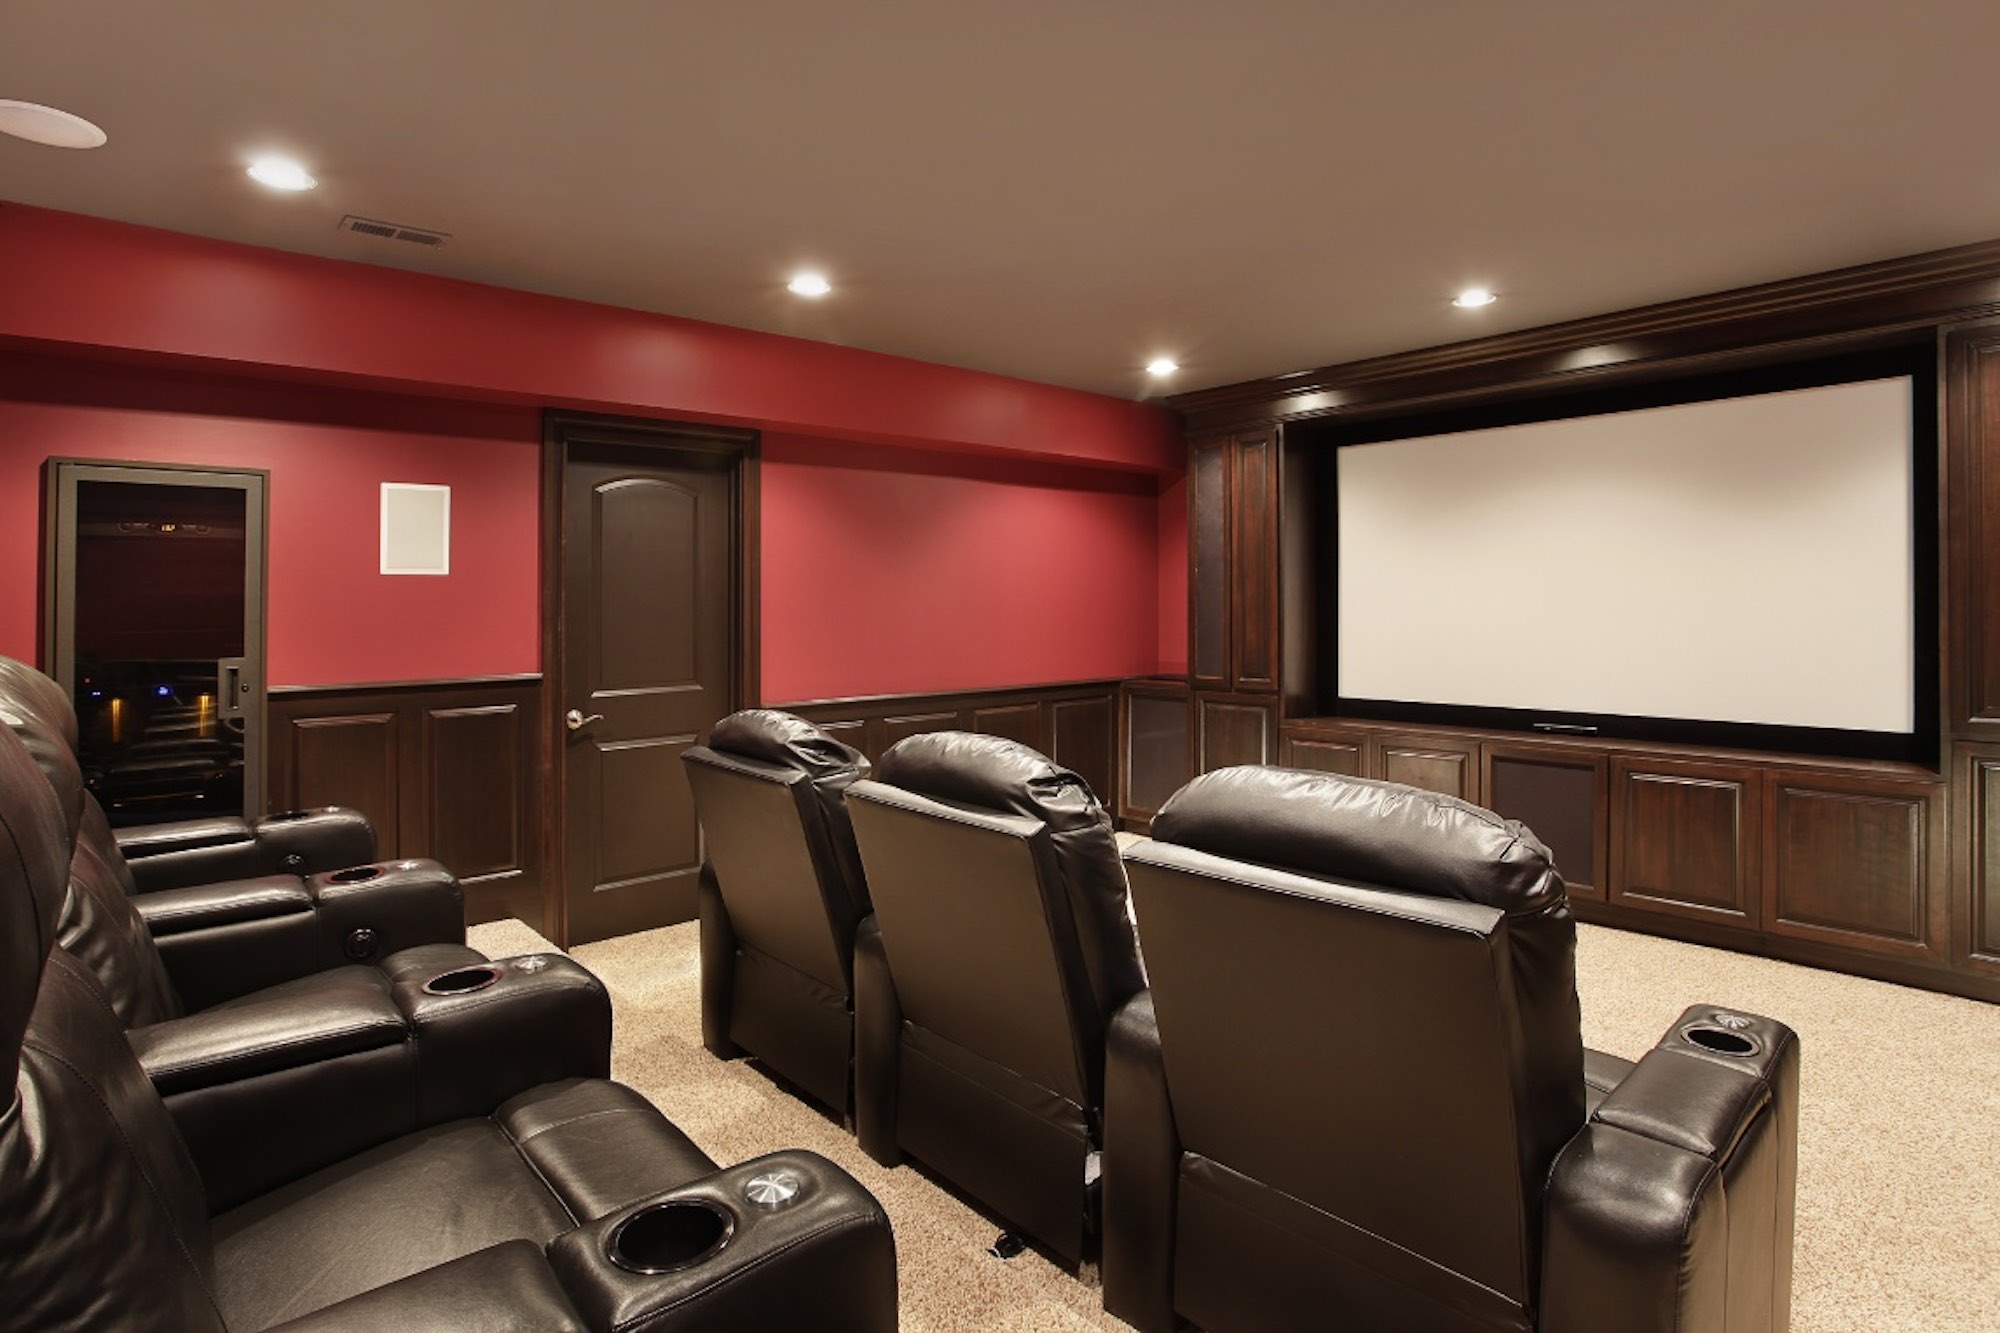 How To Build A Basement Home Theater A Start To Finish Guide Elmens